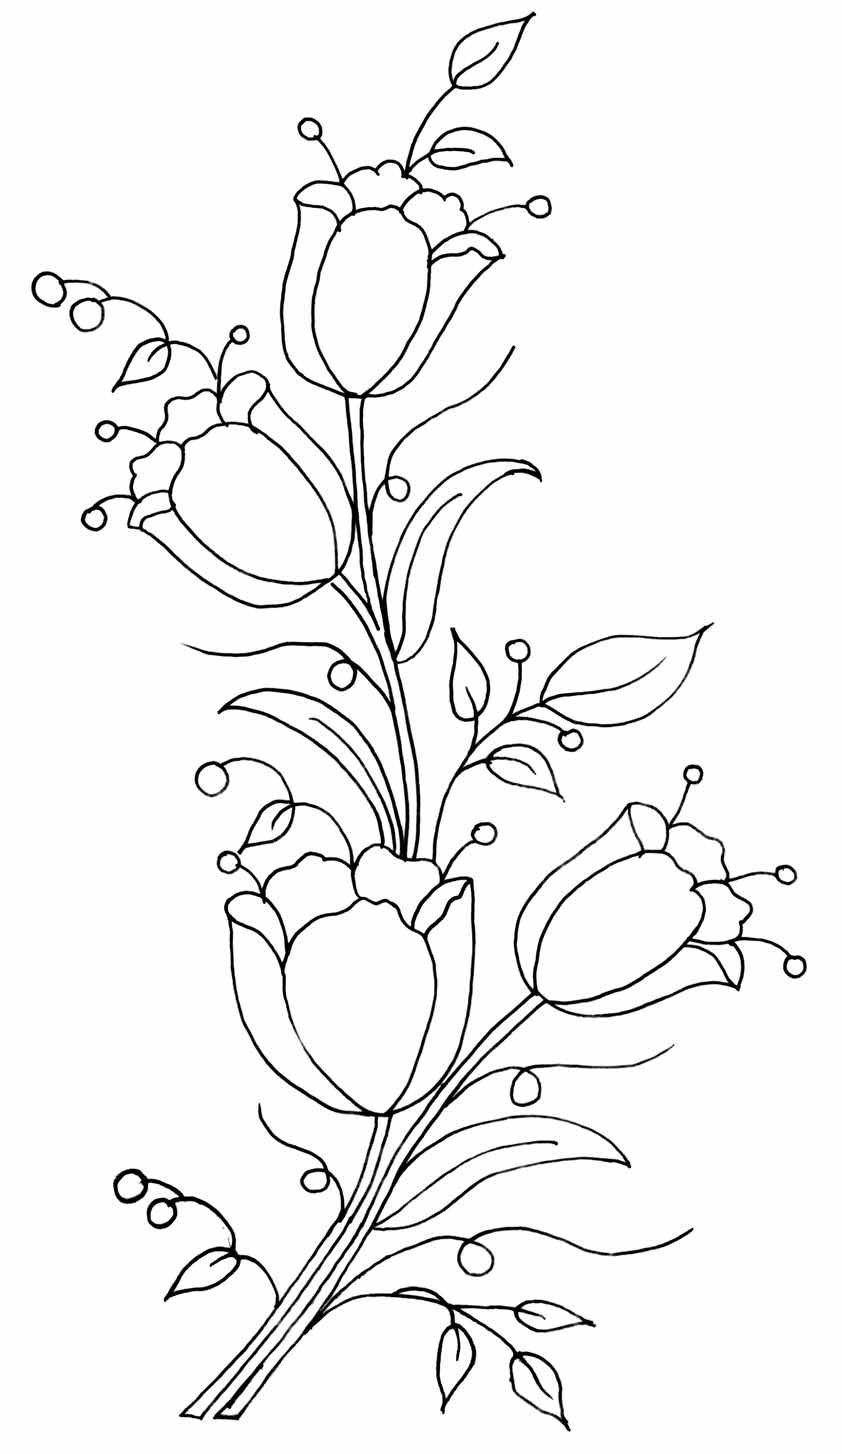 Tulips free hand embroidery designs patterns (1)